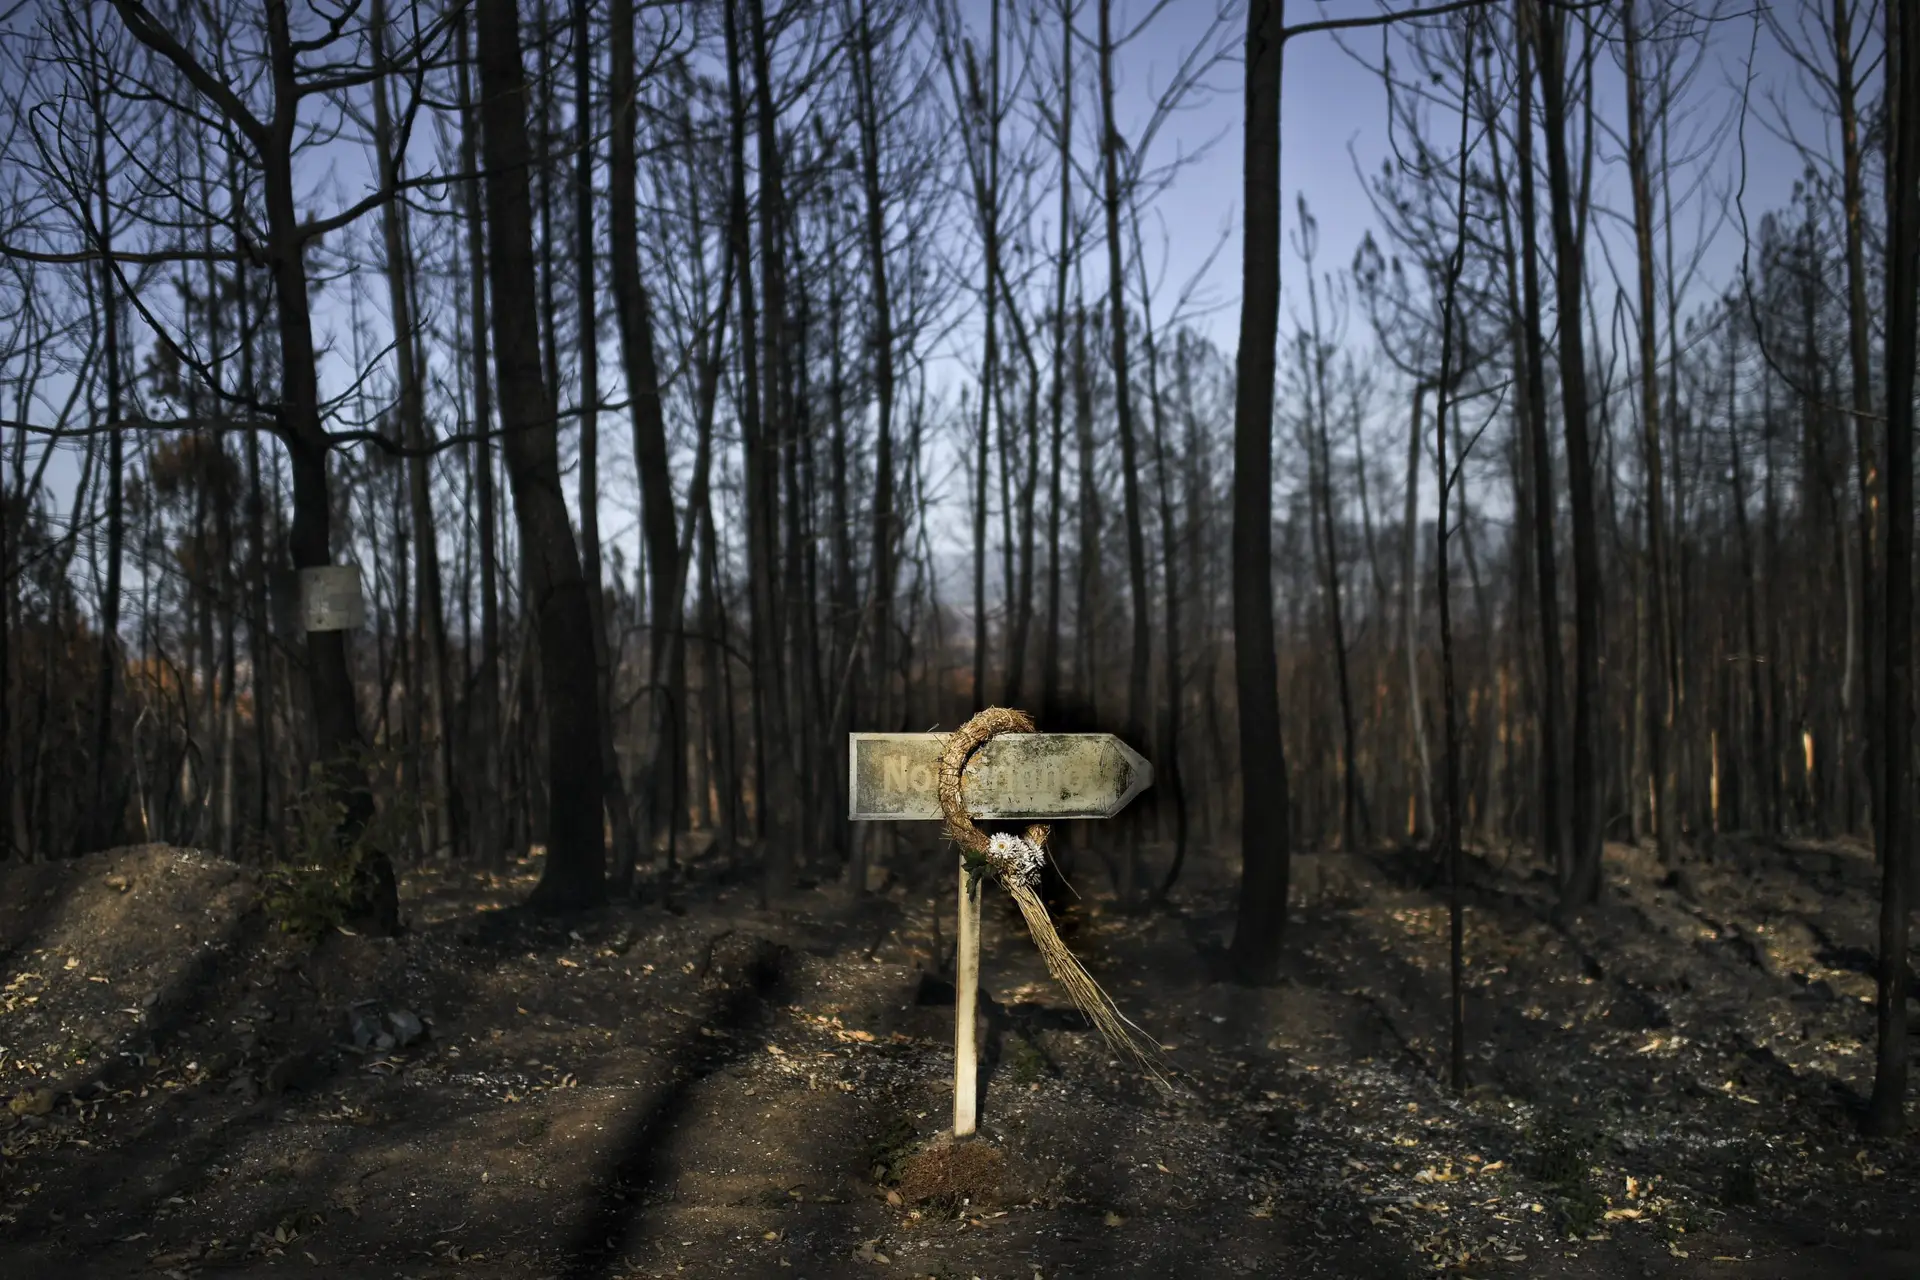 A wreath to pay tribute to the people killed by a wildfire that broke out in this region of central Portugal on June 17, 2017, hangs from a burnt traffic sign pointing to Nodeirinho village, in Pedrogao Grande, on August 9, 2017. – Broken lives, ruined houses and burnt forests. After the deadly fire last June that devastated the region of Pedrogao Grande, in central Portugal, its inhabitants are now confronted with the impossible task of “starting all over again”. – TO GO WITH AFP STORY by THOMAS CABRAL (Photo by PATRICIA DE MELO MOREIRA / AFP) / TO GO WITH AFP STORY by THOMAS CABRAL (Photo by PATRICIA DE MELO MOREIRA/AFP via Getty Images)